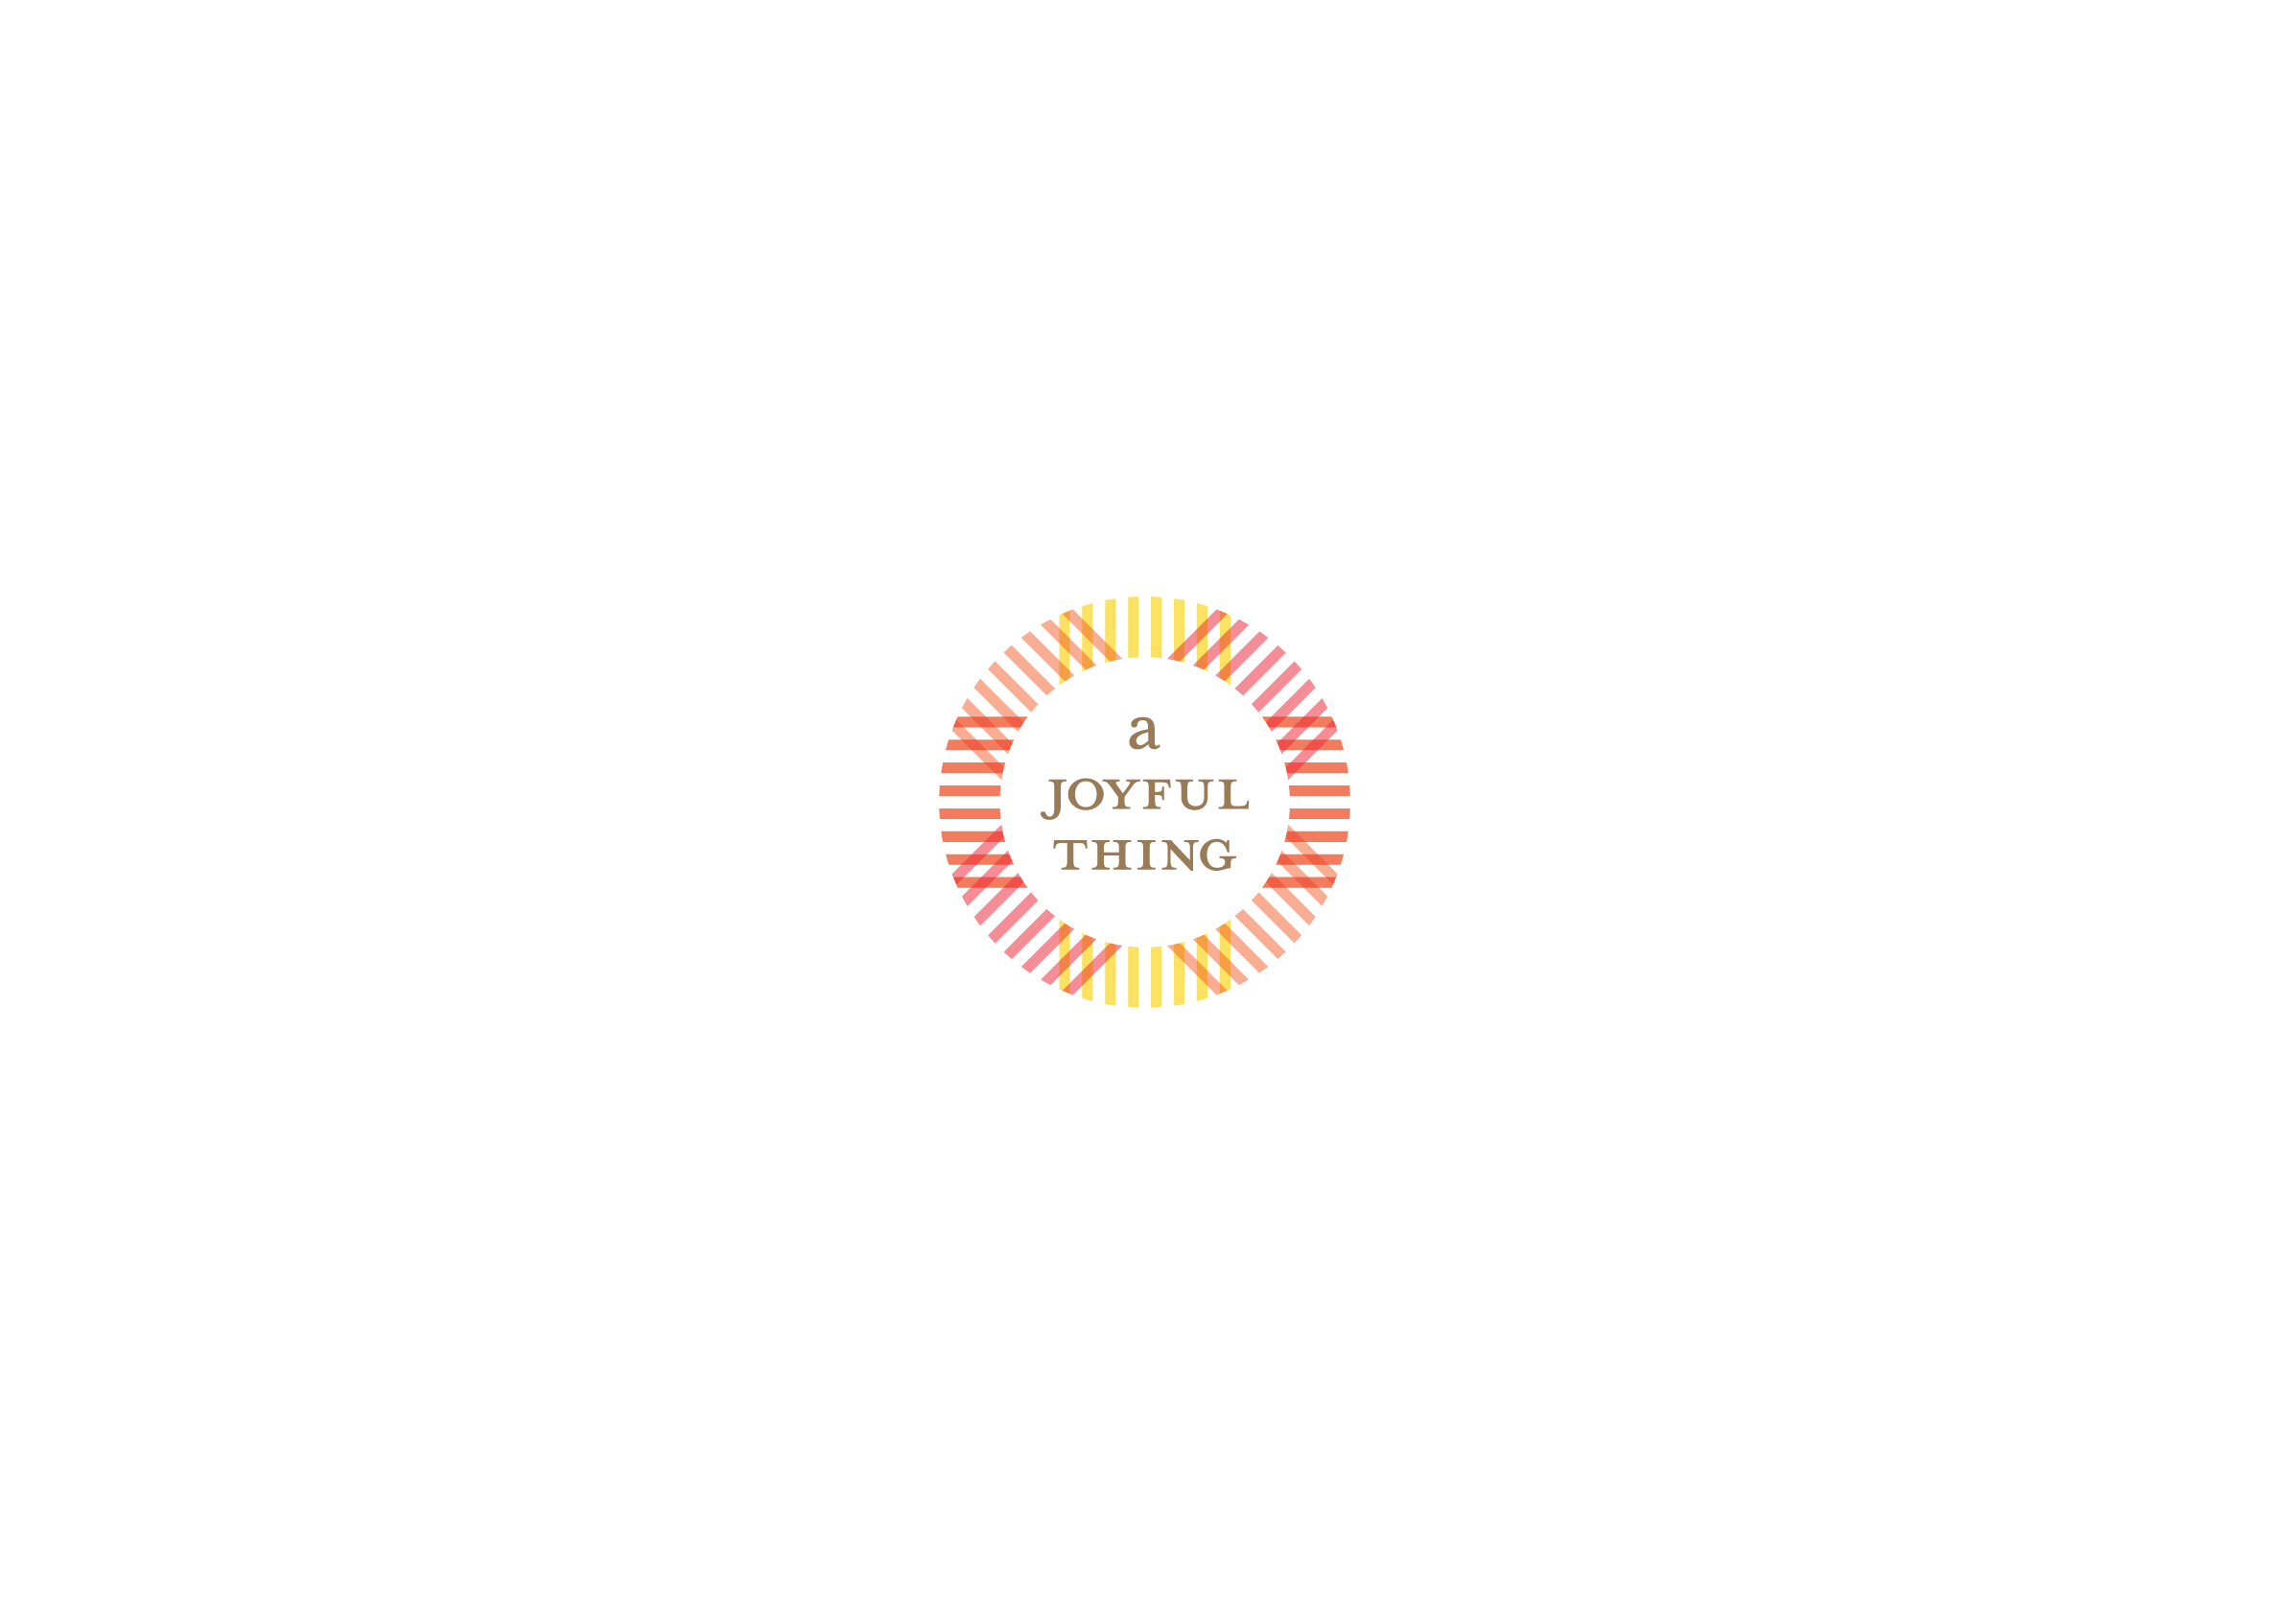 Logo for A Joyful Thing, a well-being company by Ottawa Graphic Design Studio idApostle